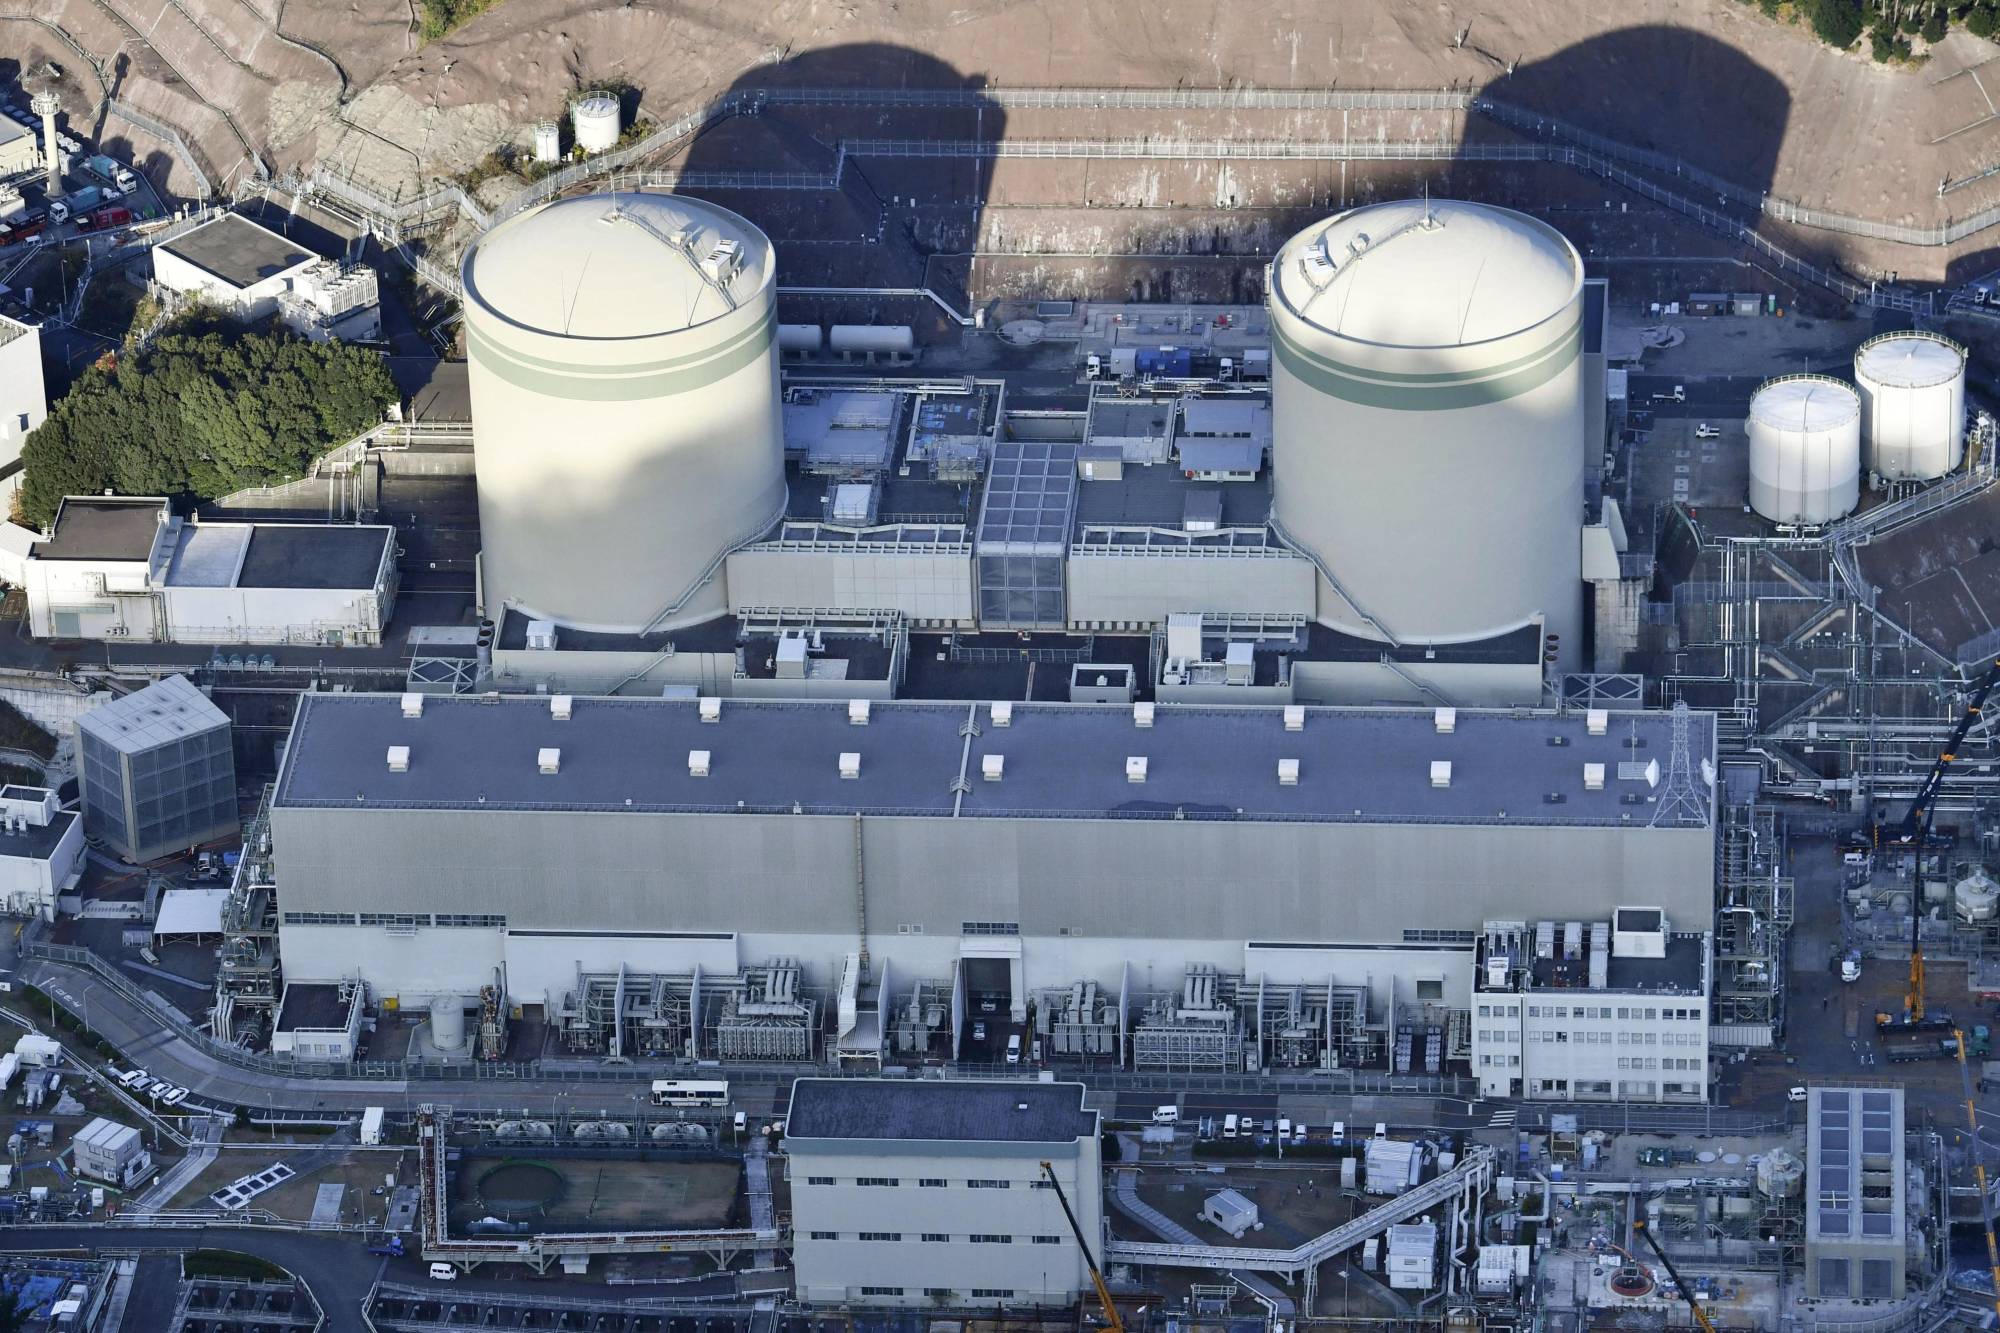 The Nos. 1 and 2 reactors at Kansai Electric Power Co.'s Takahama nuclear power plant in Takahama, Fukui Prefecture | KYODO